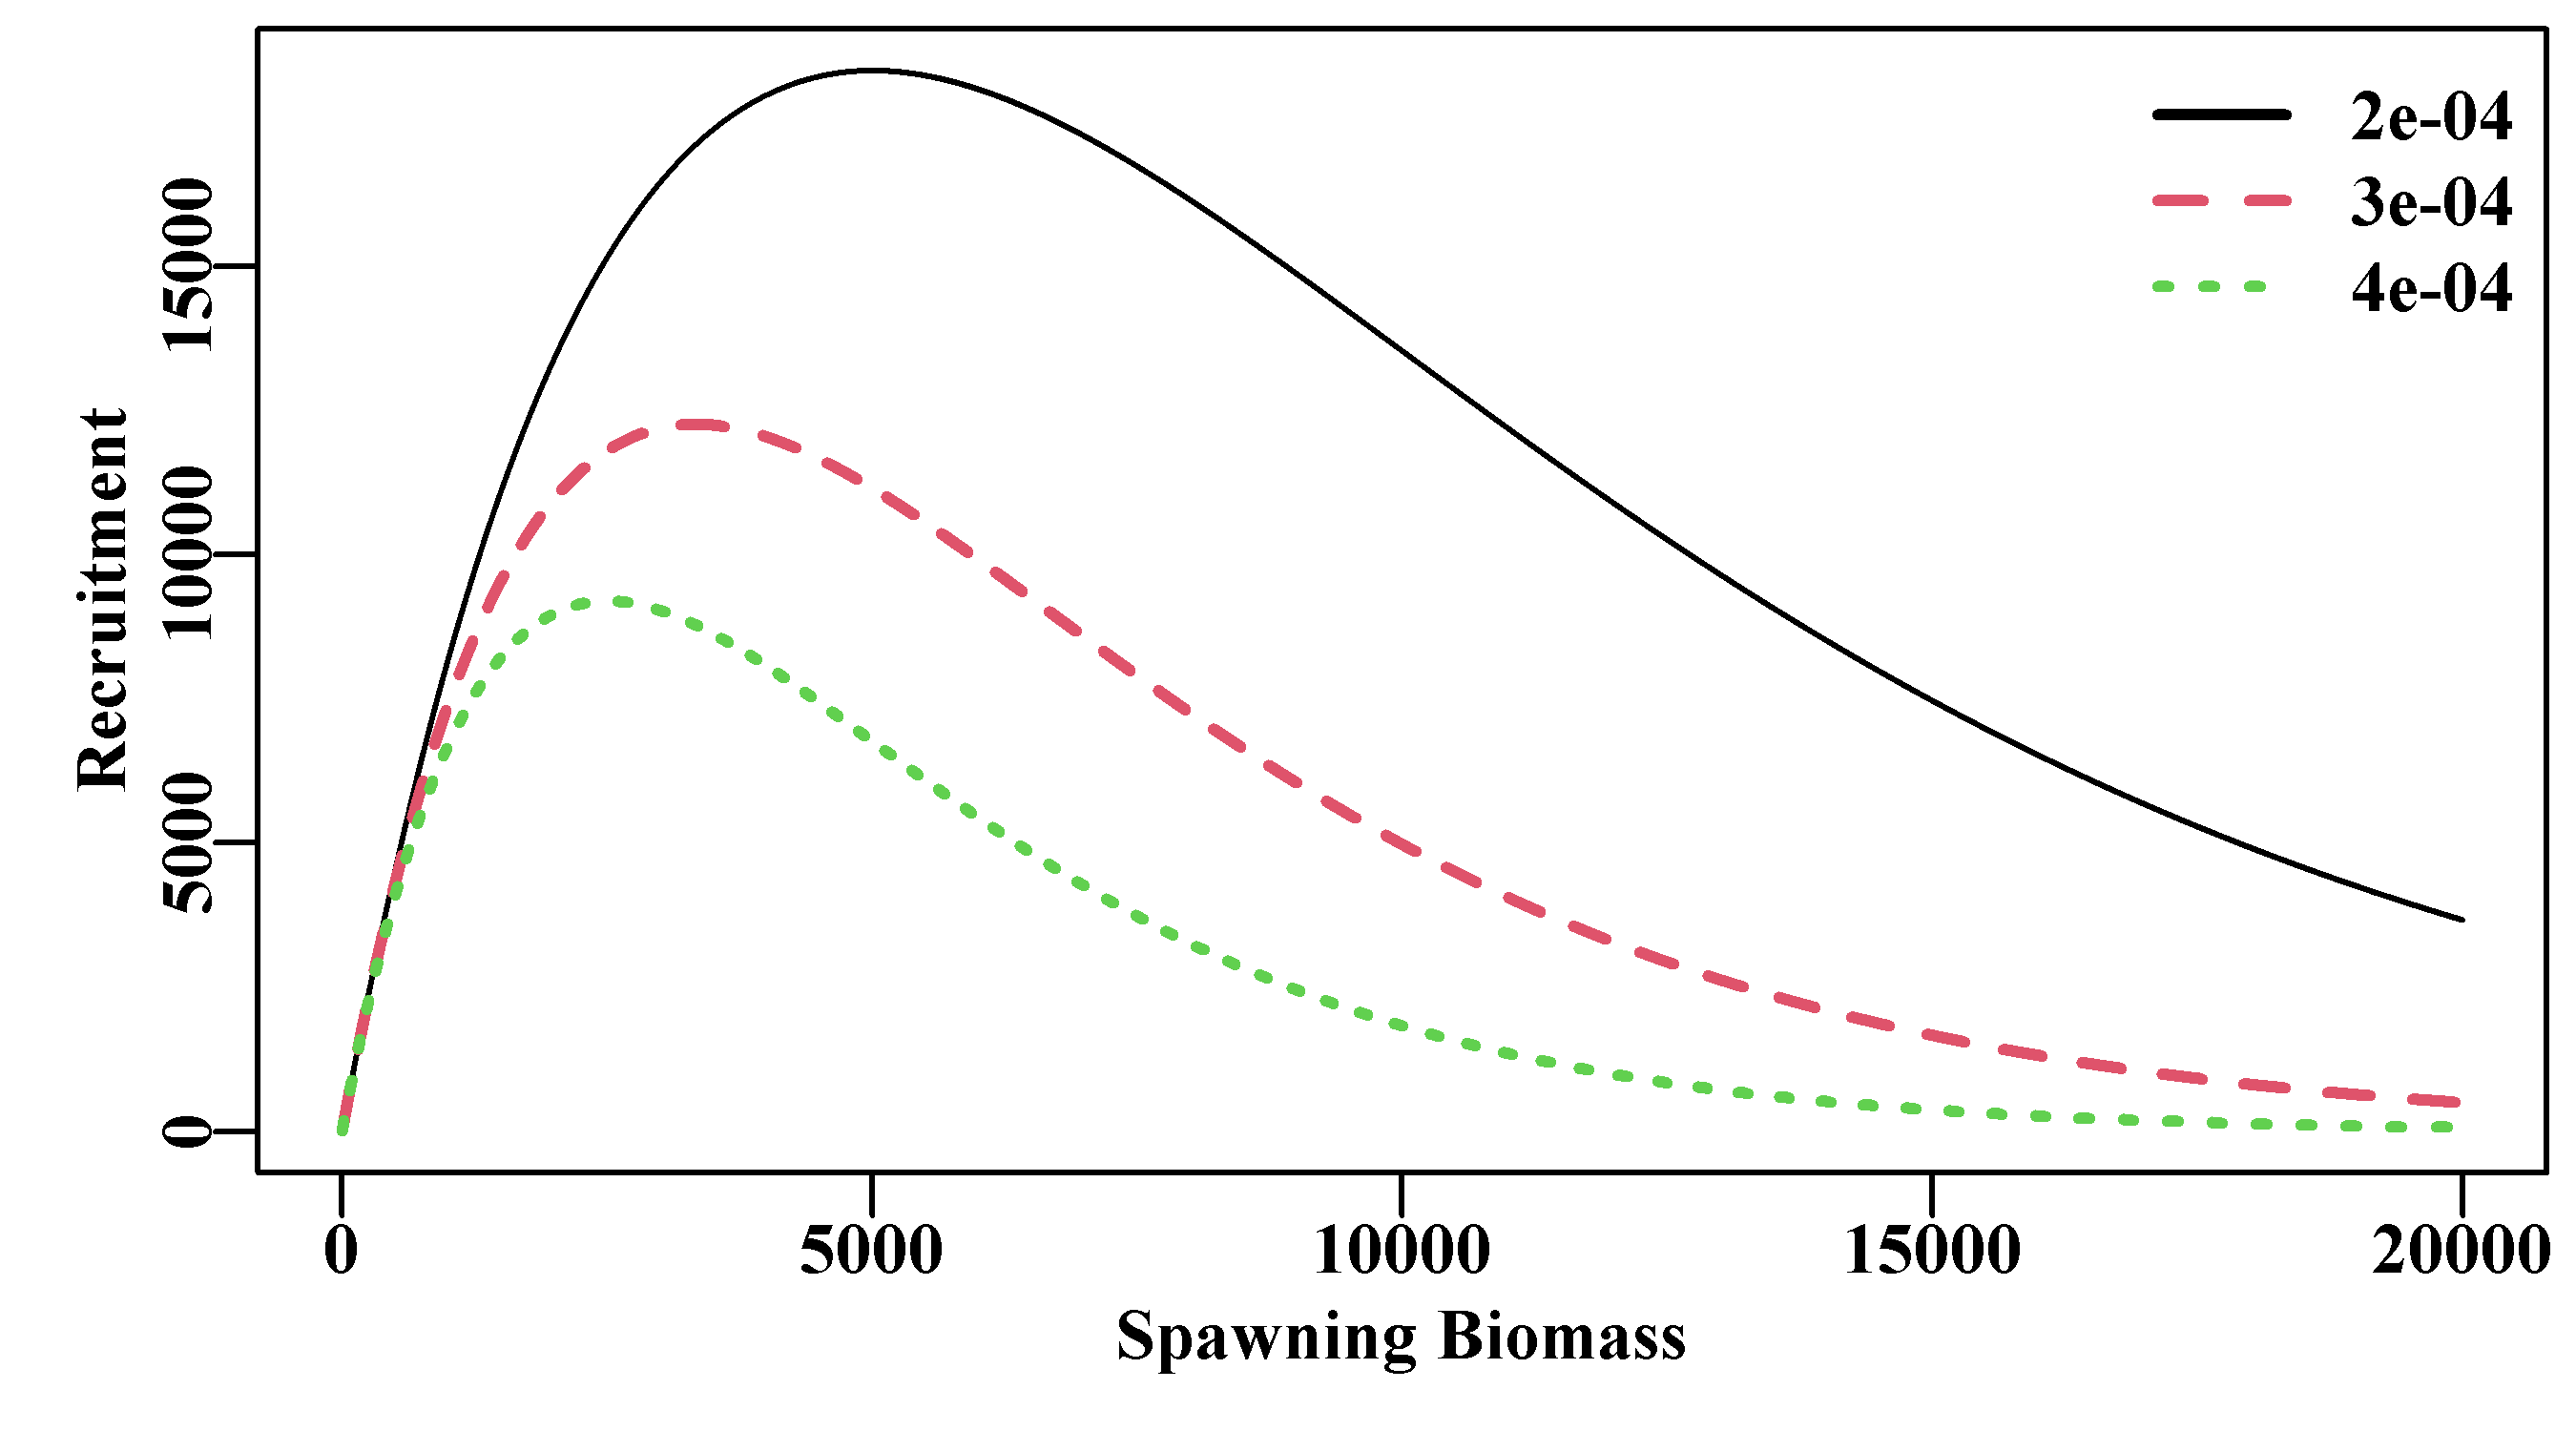 Two Ricker stock recruitment curves both with a constant \(a = 10\) but with different \(b\) values. Note that the \(b\) value mainly influences the level of decline in recruitment with increasing biomass and has little effect on the initial steepness.